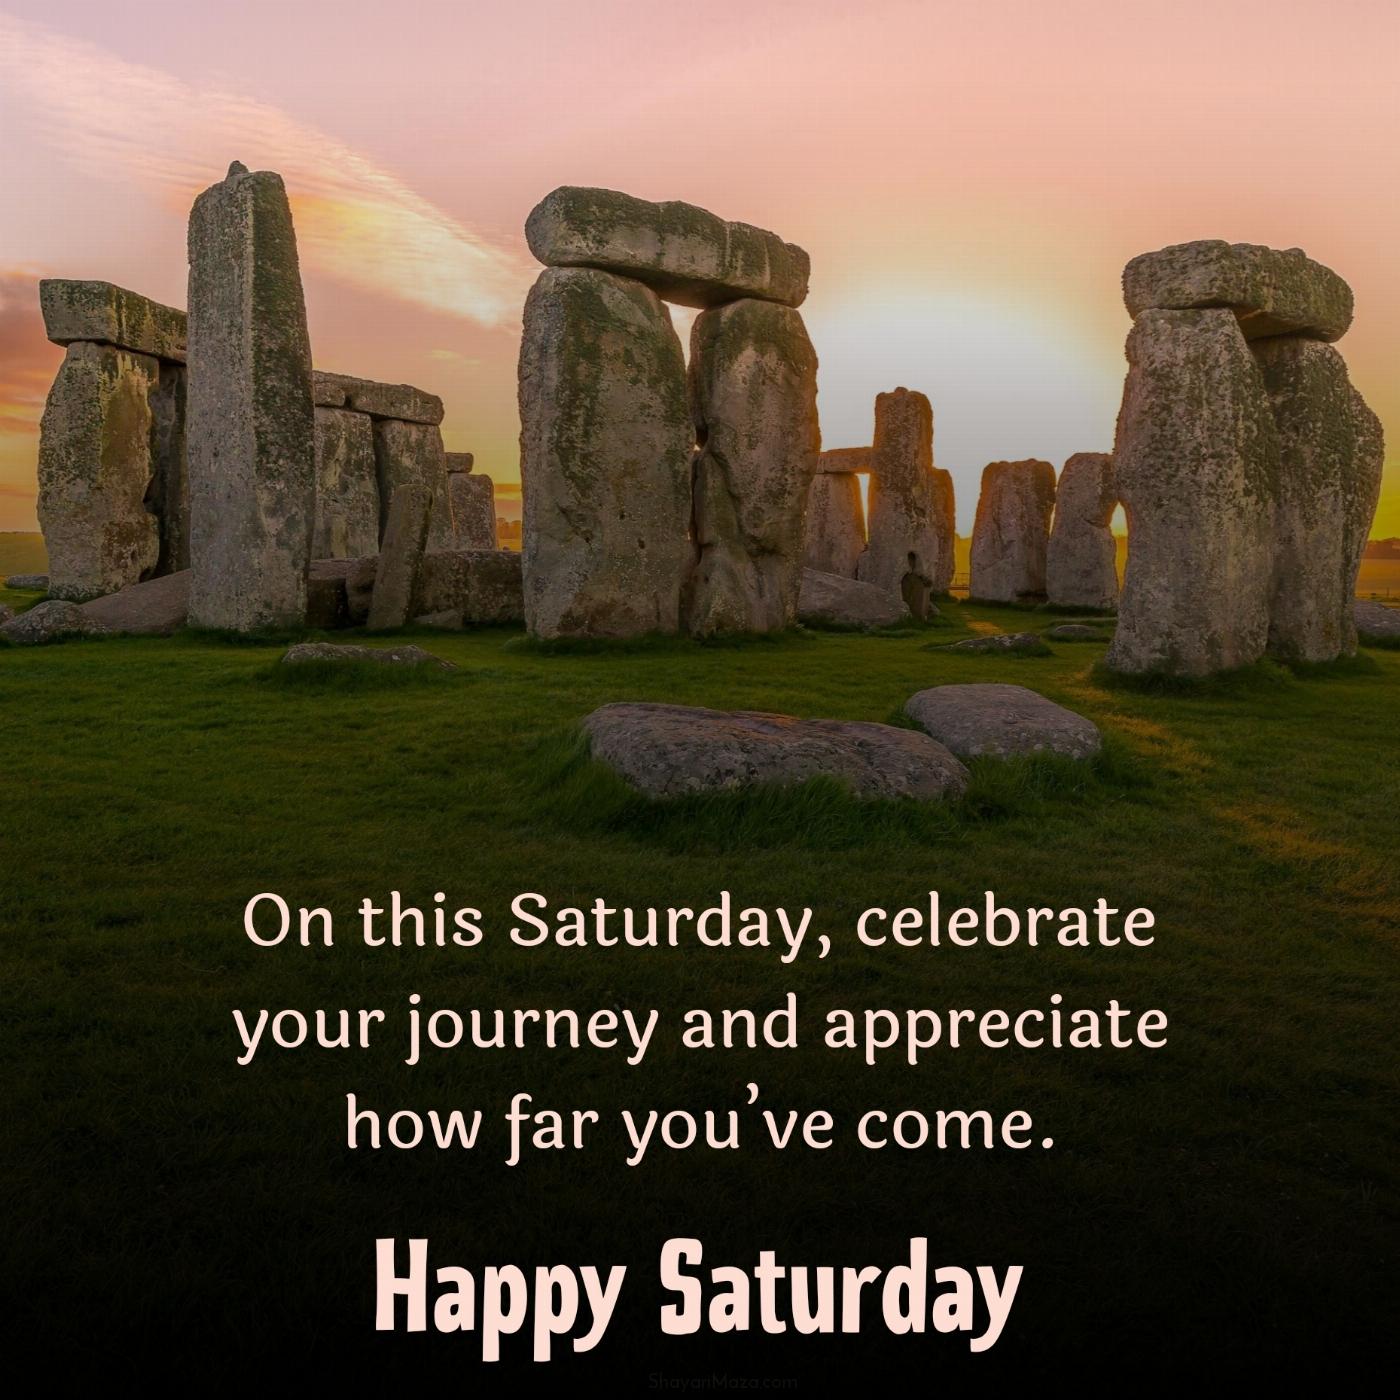 On this Saturday celebrate your journey and appreciate